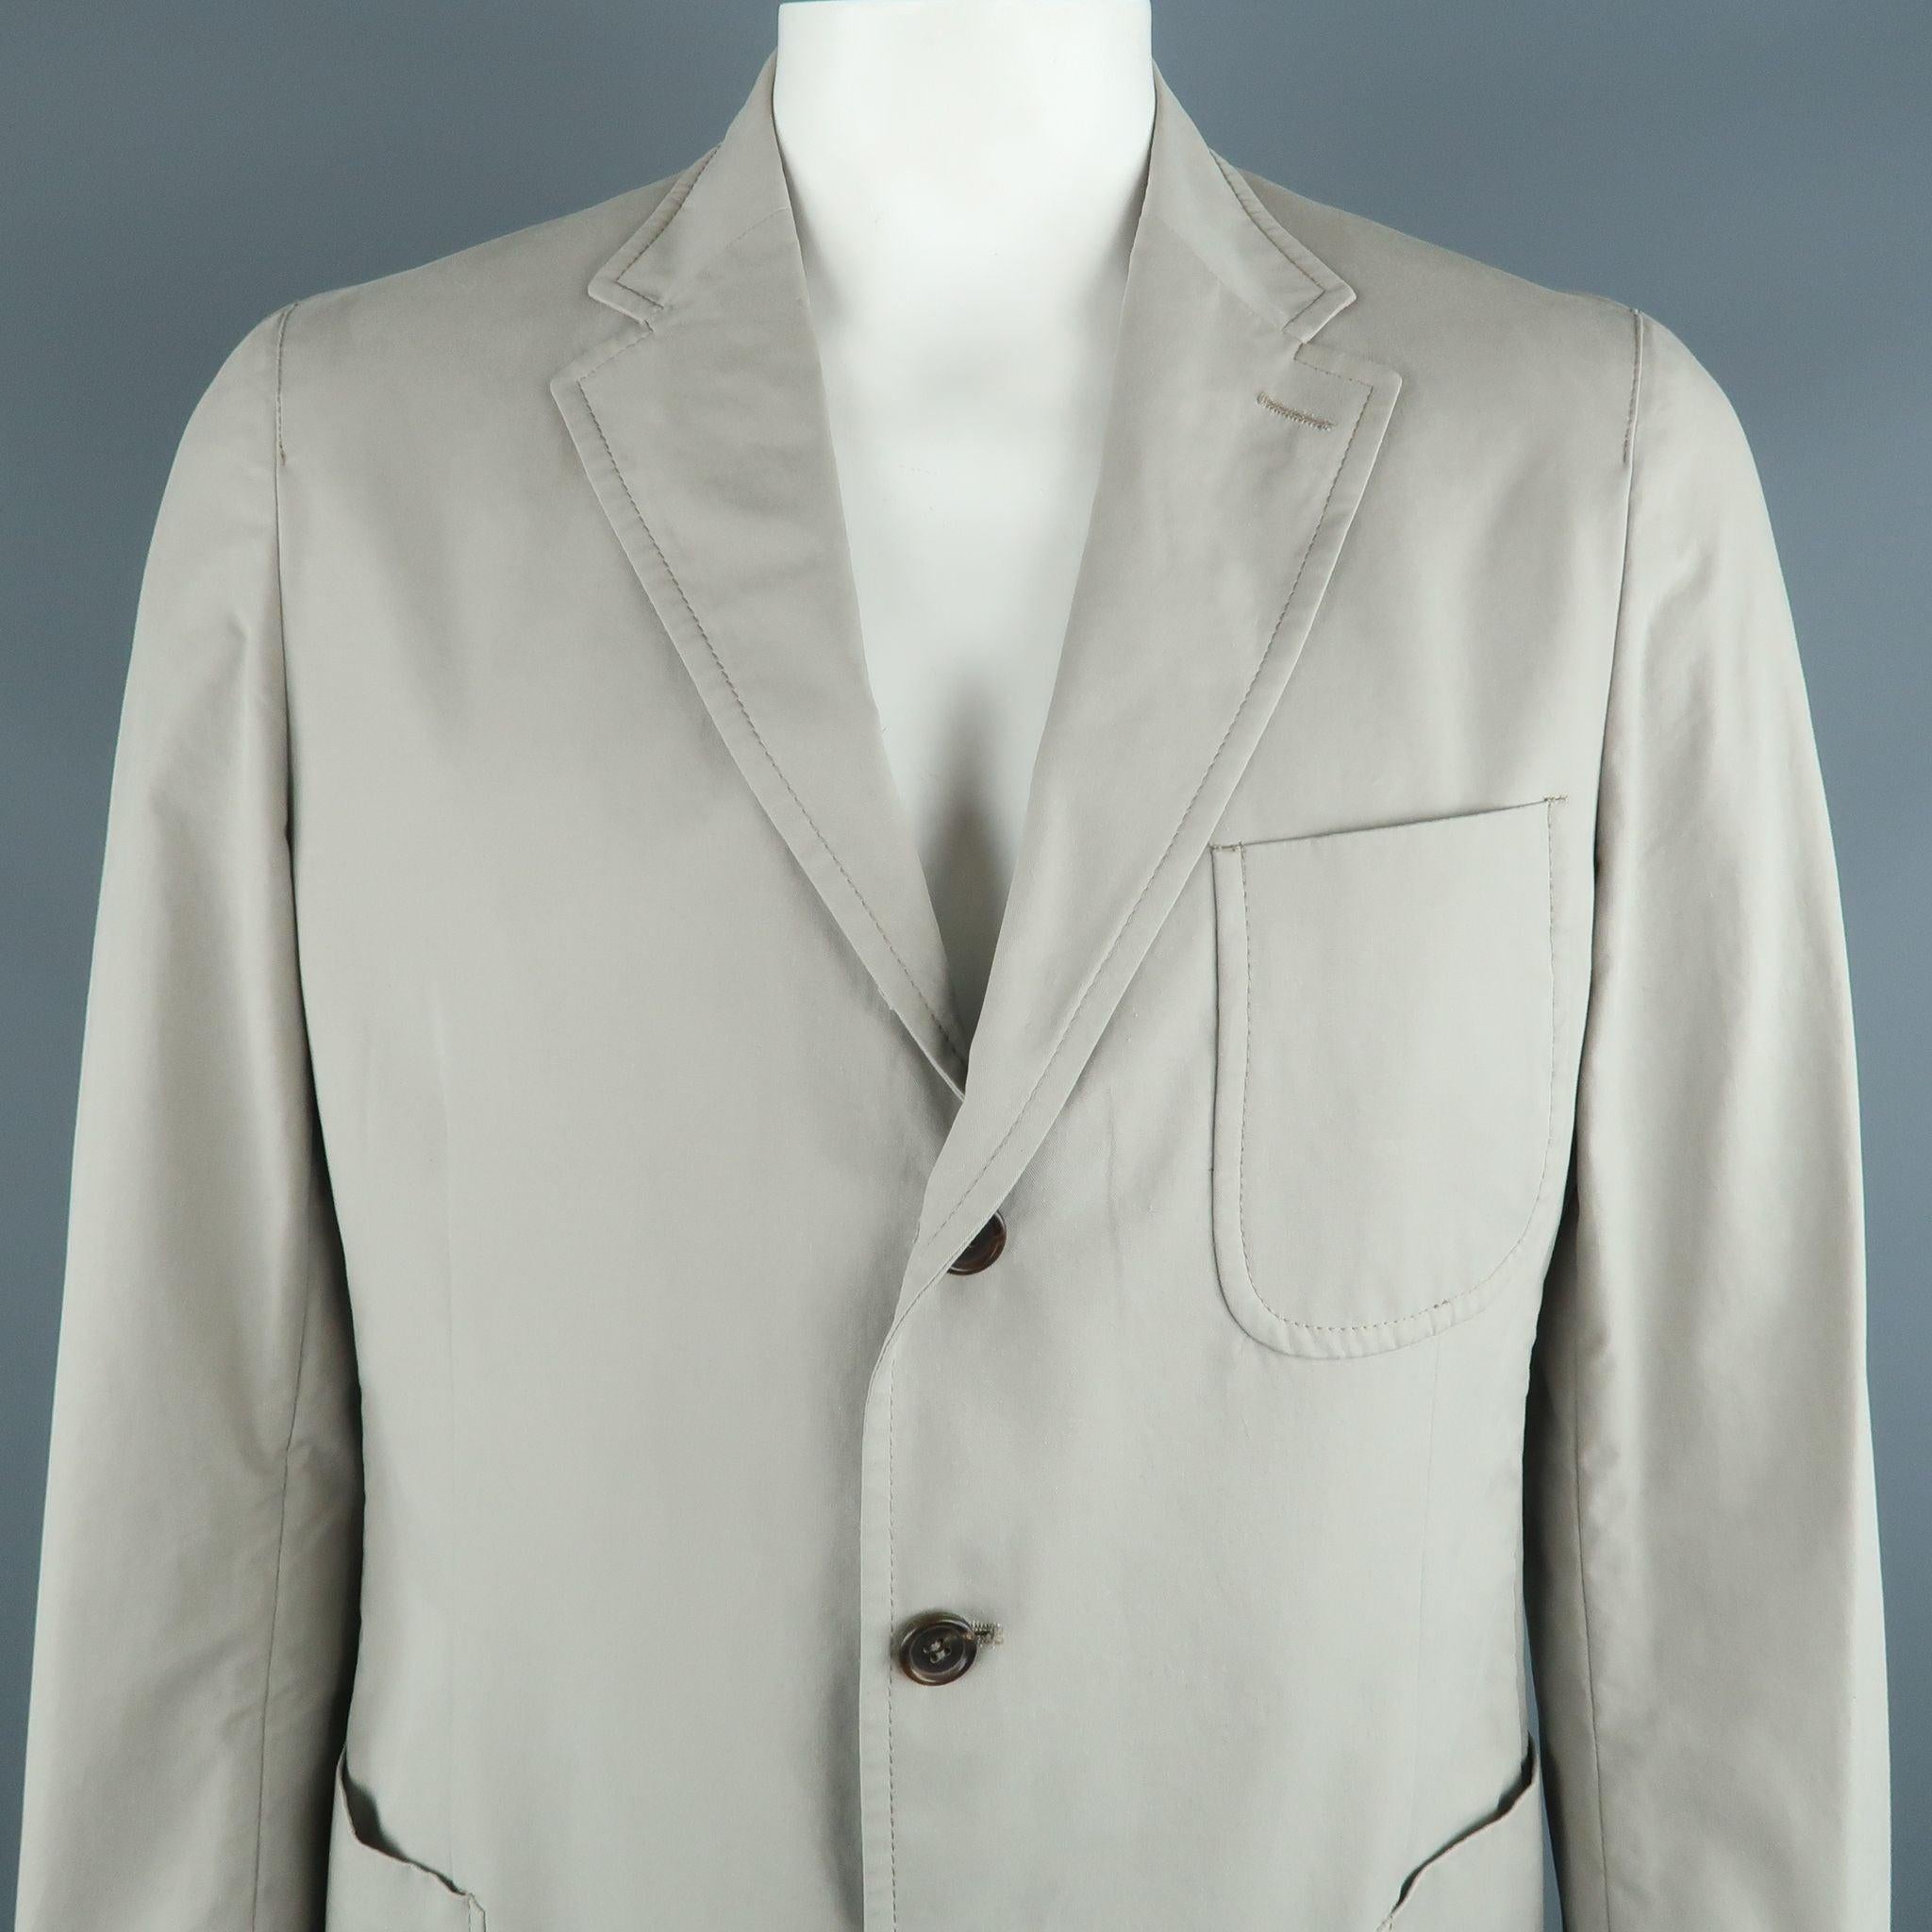 PRADA sport coat comes in light gray cotton featuring a notch lapel, three button closure, and patch pockets. Made in Italy.Excellent Pre-Owned Condition. 
 

 Marked:  54 R 
 

 Measurements: 
  
 Shoulder: 18.5 inches Chest: 40 inches Sleeve: 26.5